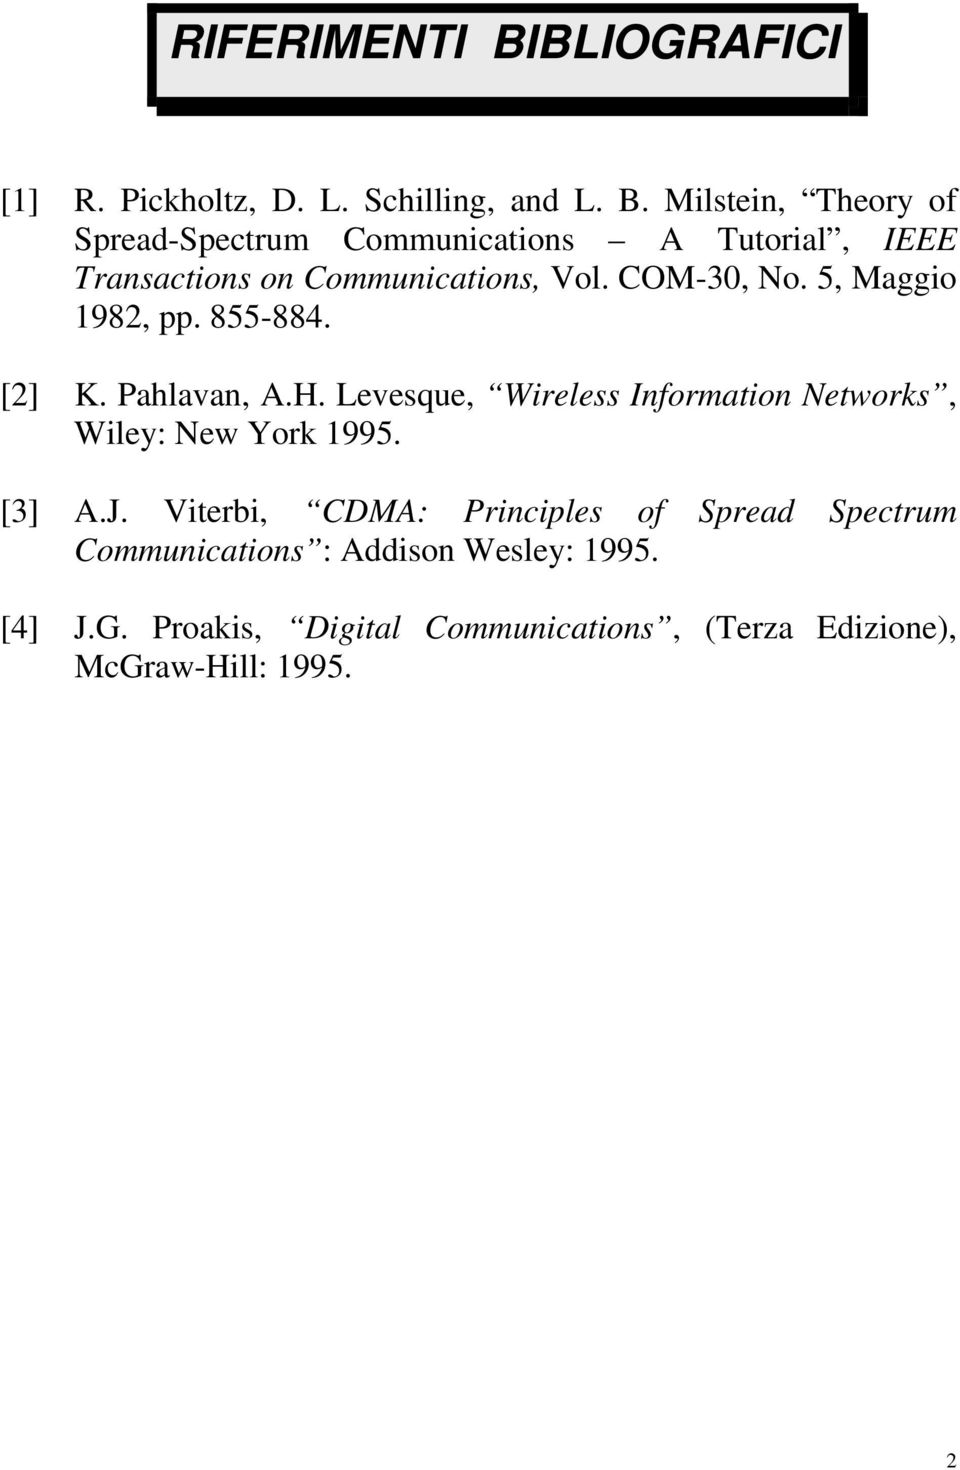 Levesque, Wireless Information Networks, Wiley: New York 1995. [3] A.J.